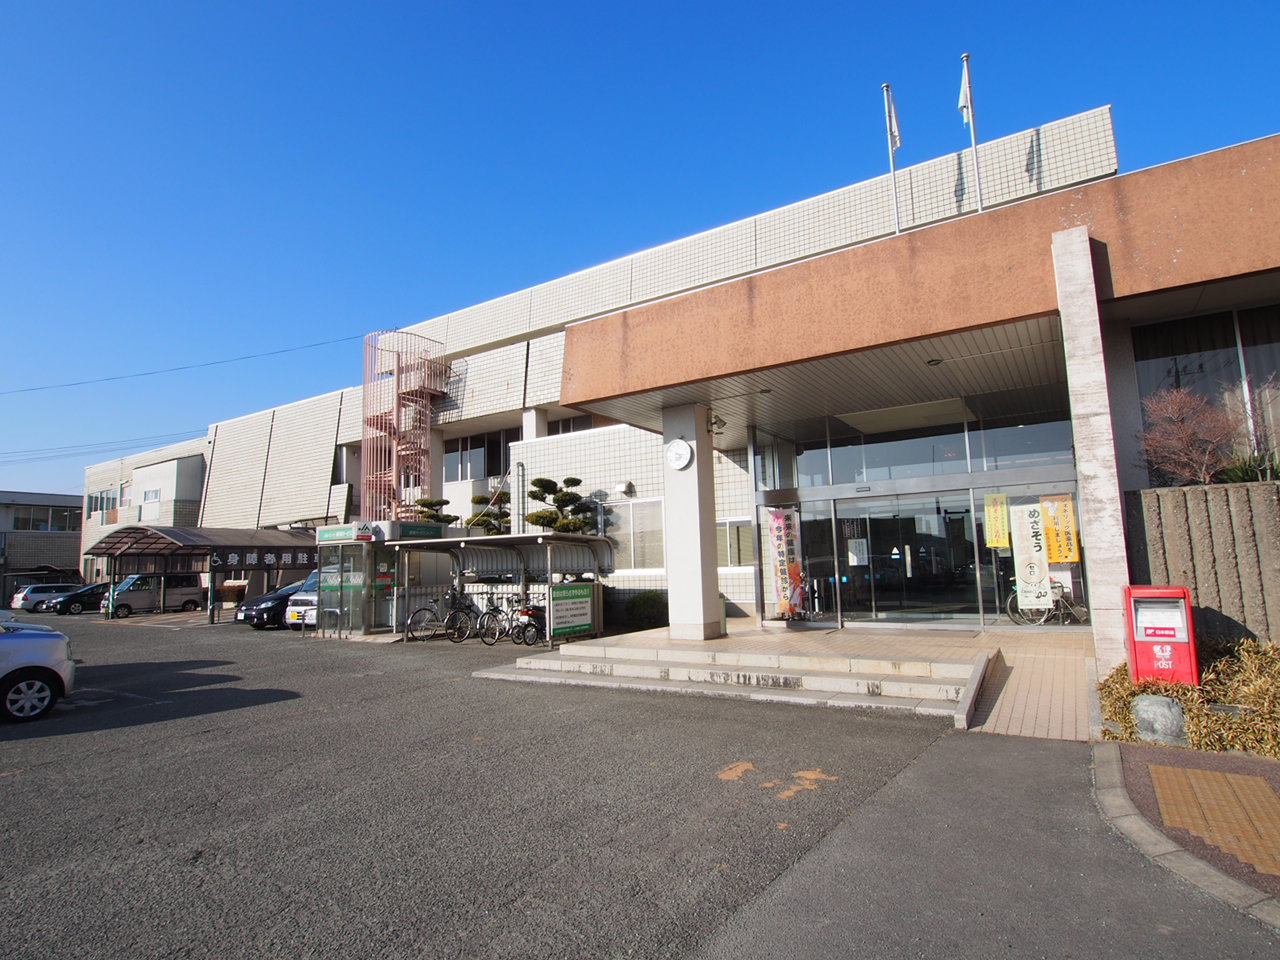 Government office. 1176m to Hirokawa town office (government office)